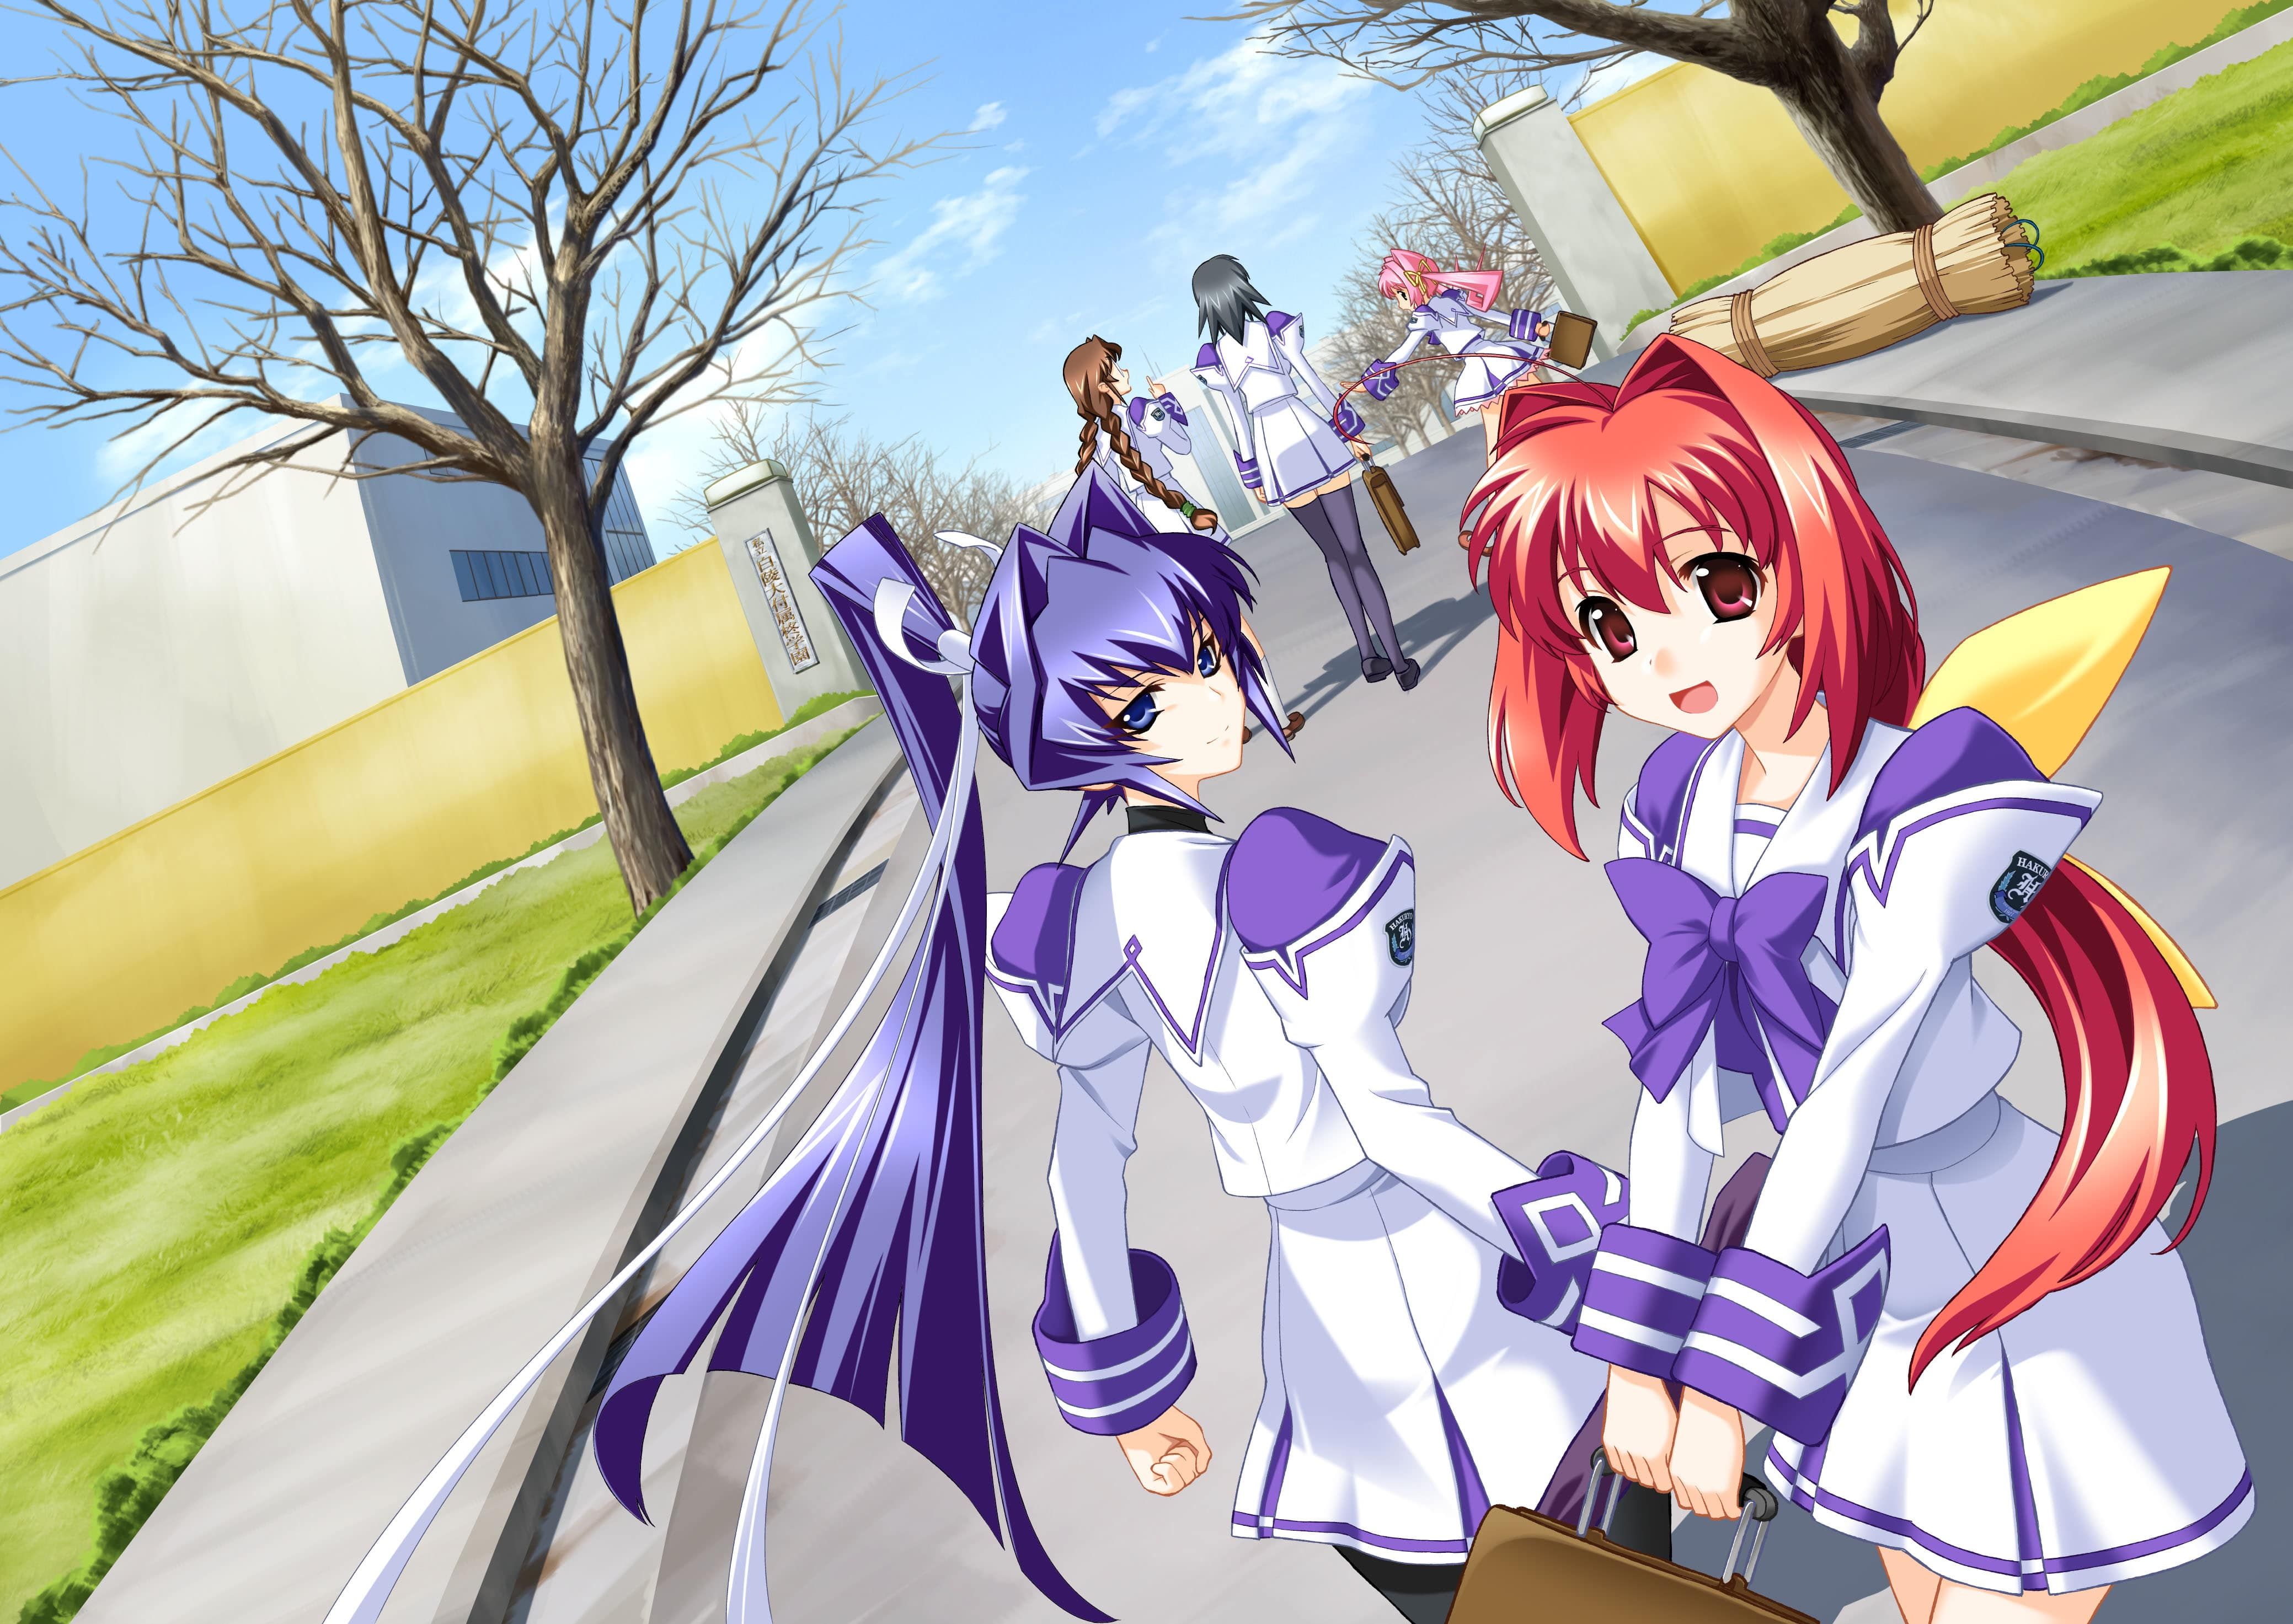 Muv-Luv Wallpapers